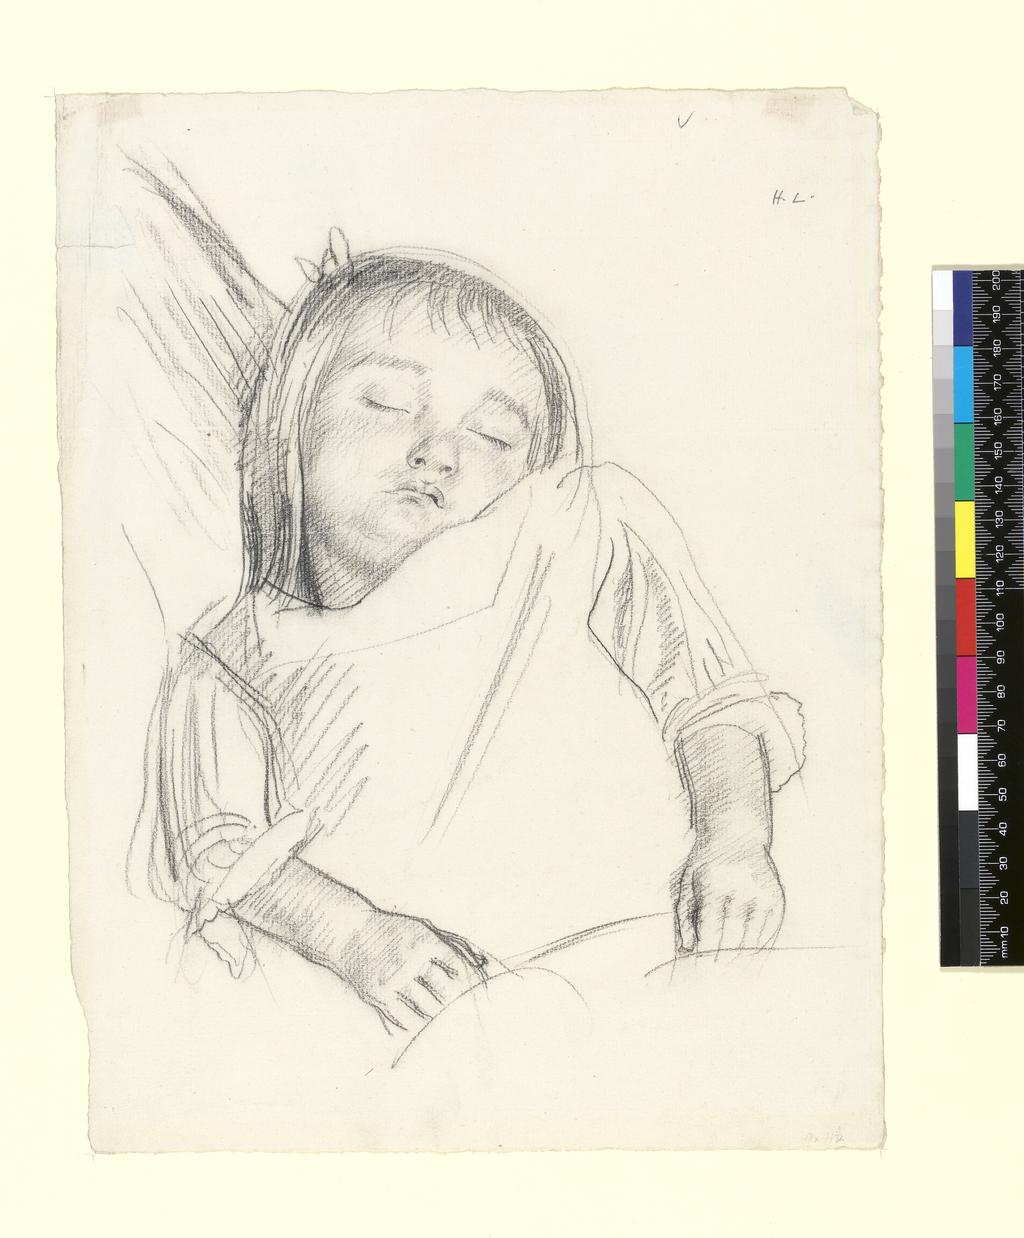 An image of Sleeping Child. Lamb, Henry. Black pencil (Conté crayon?) on white paper, height 309 mm, width 237 mm.